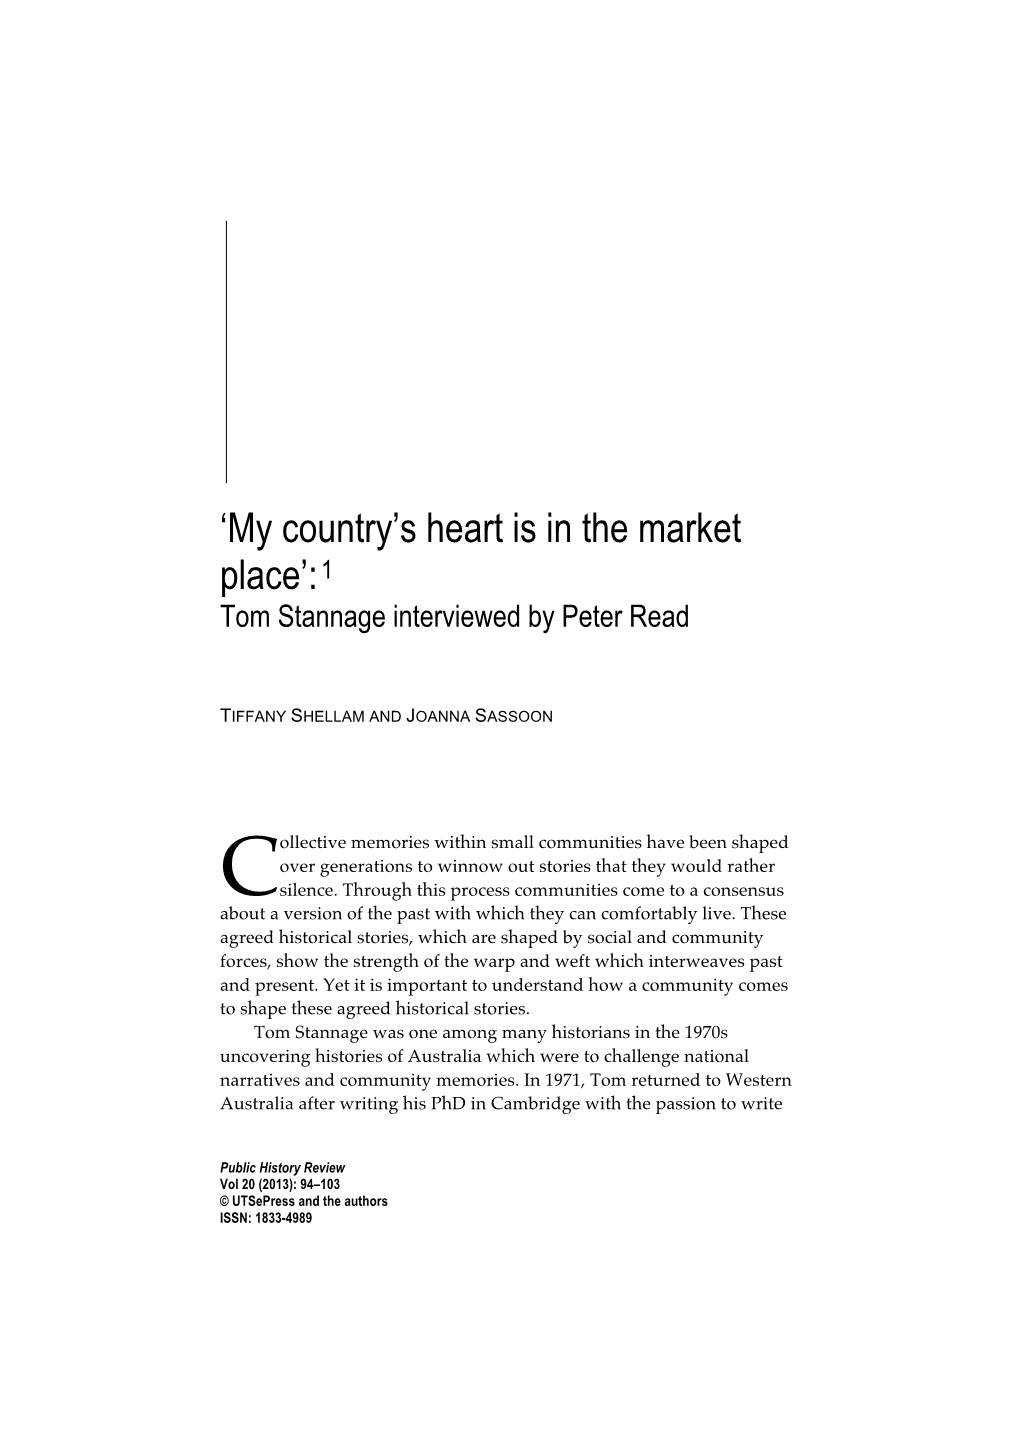 'My Country's Heart Is in the Market Place':1